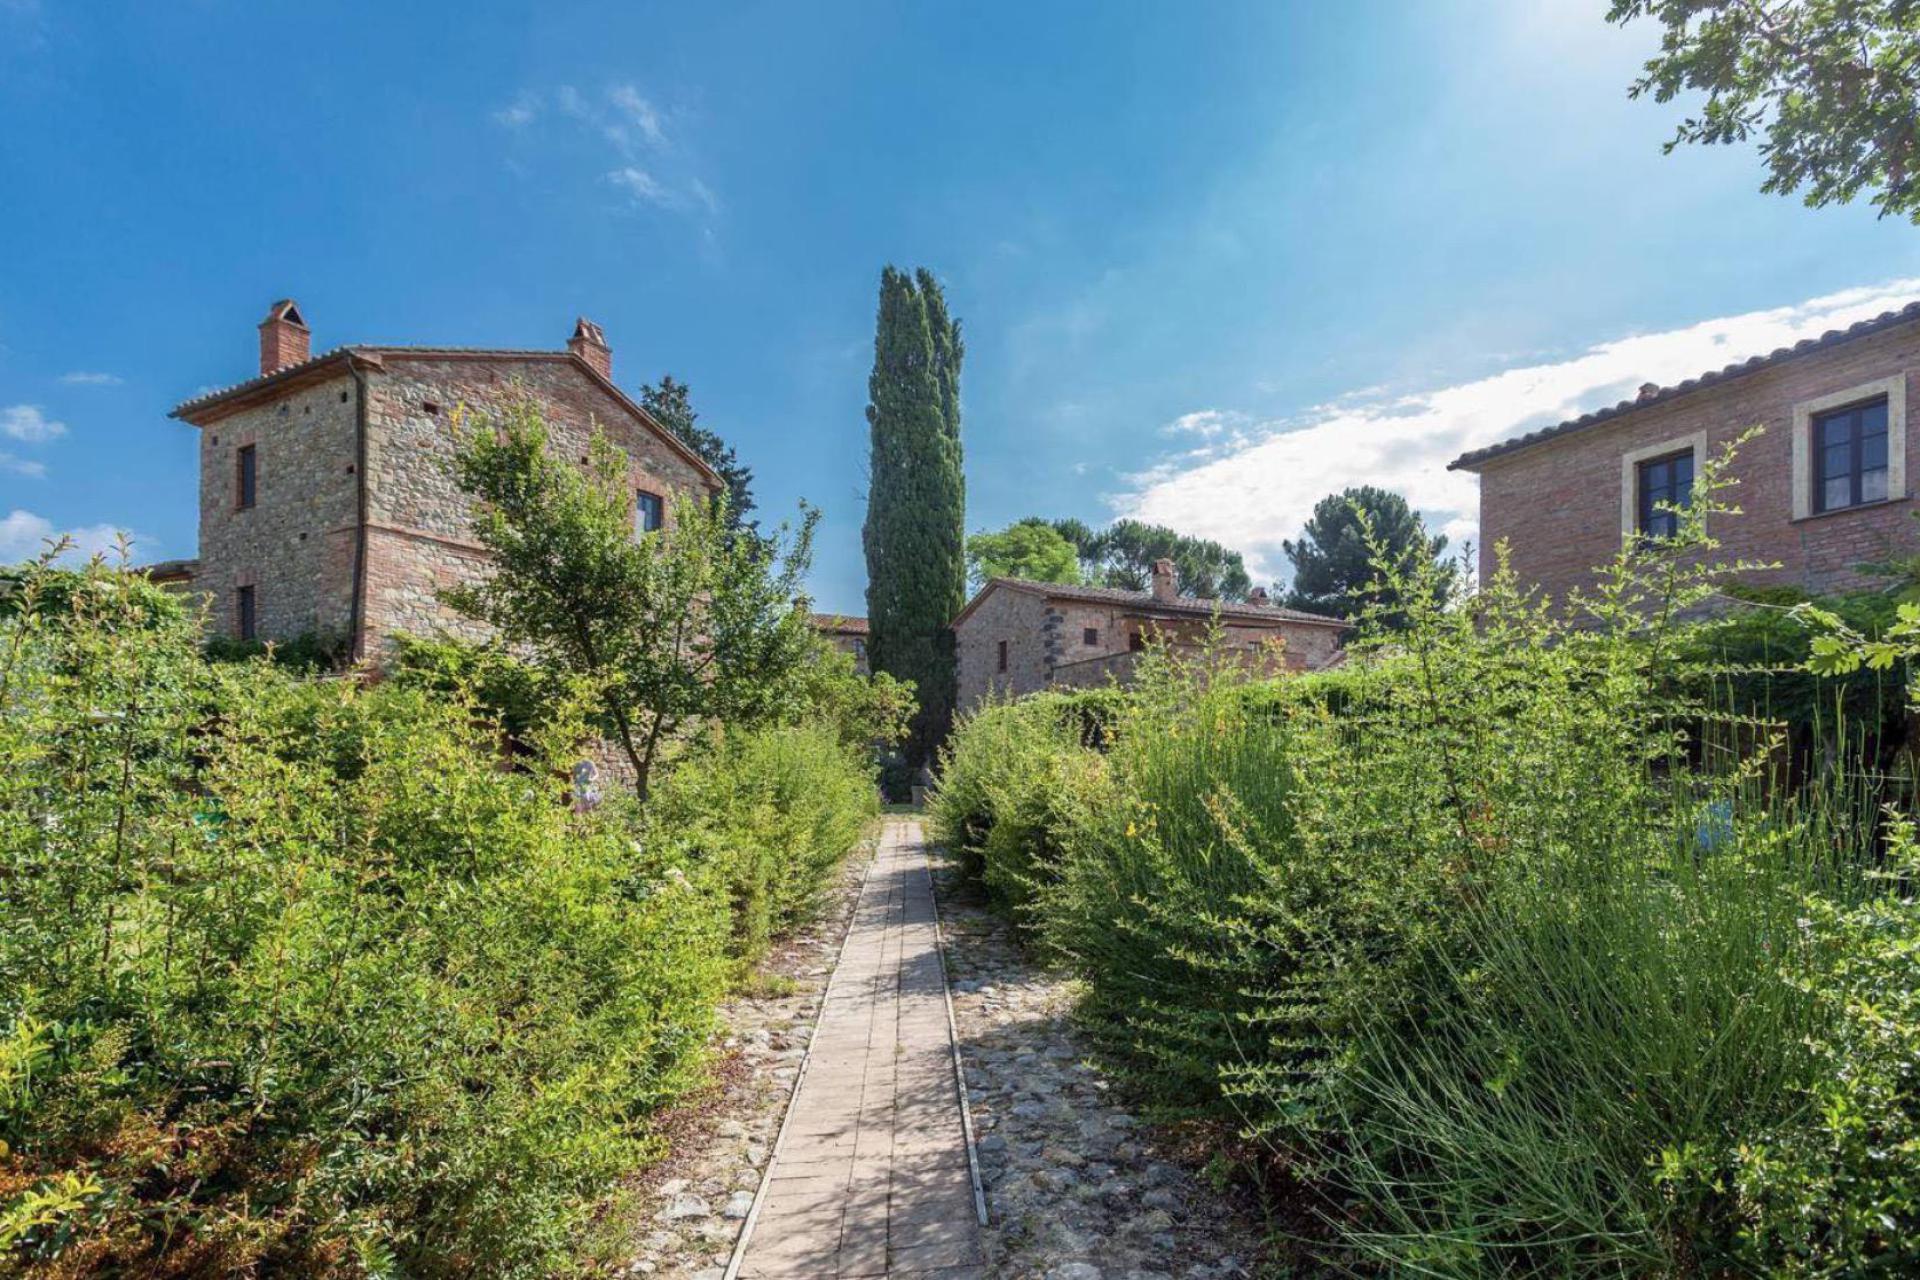 Cozy and child-friendly Agriturismo - Farmhouse in Umbria